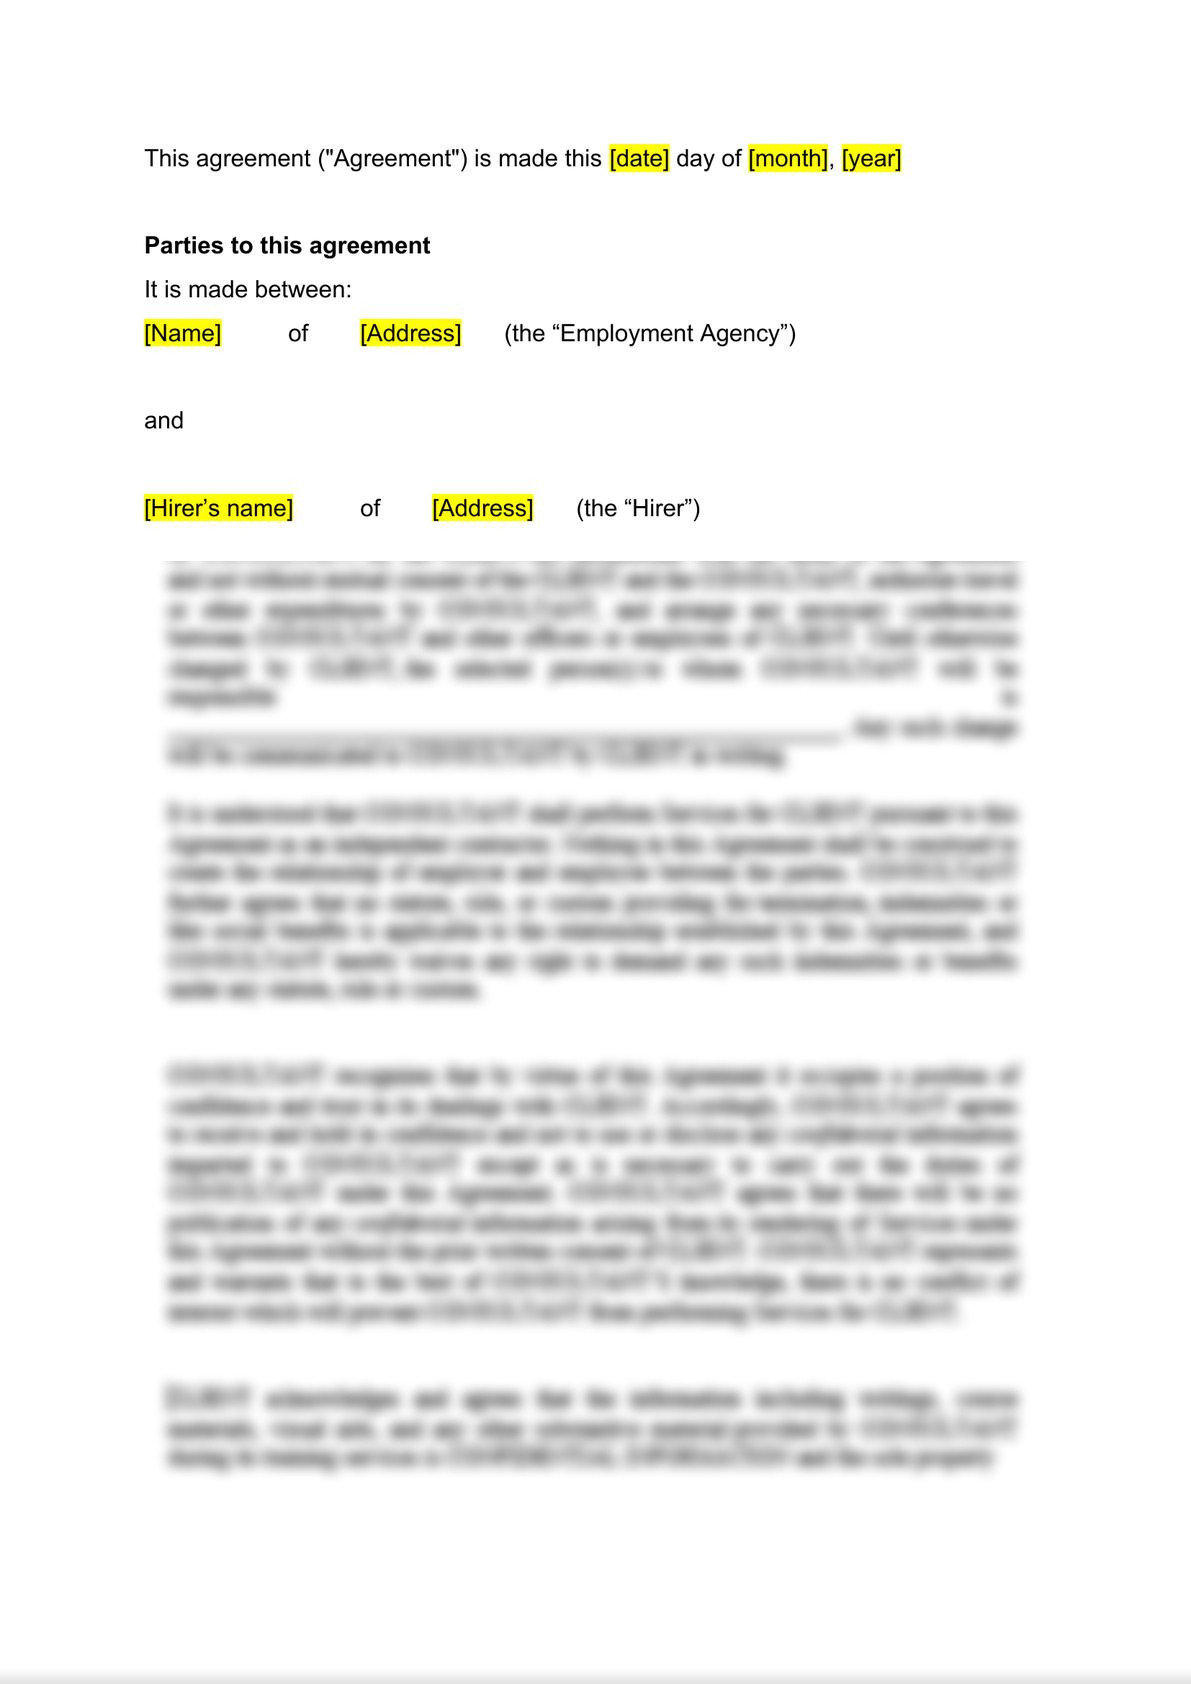 Employment agency agreement: client's version-1